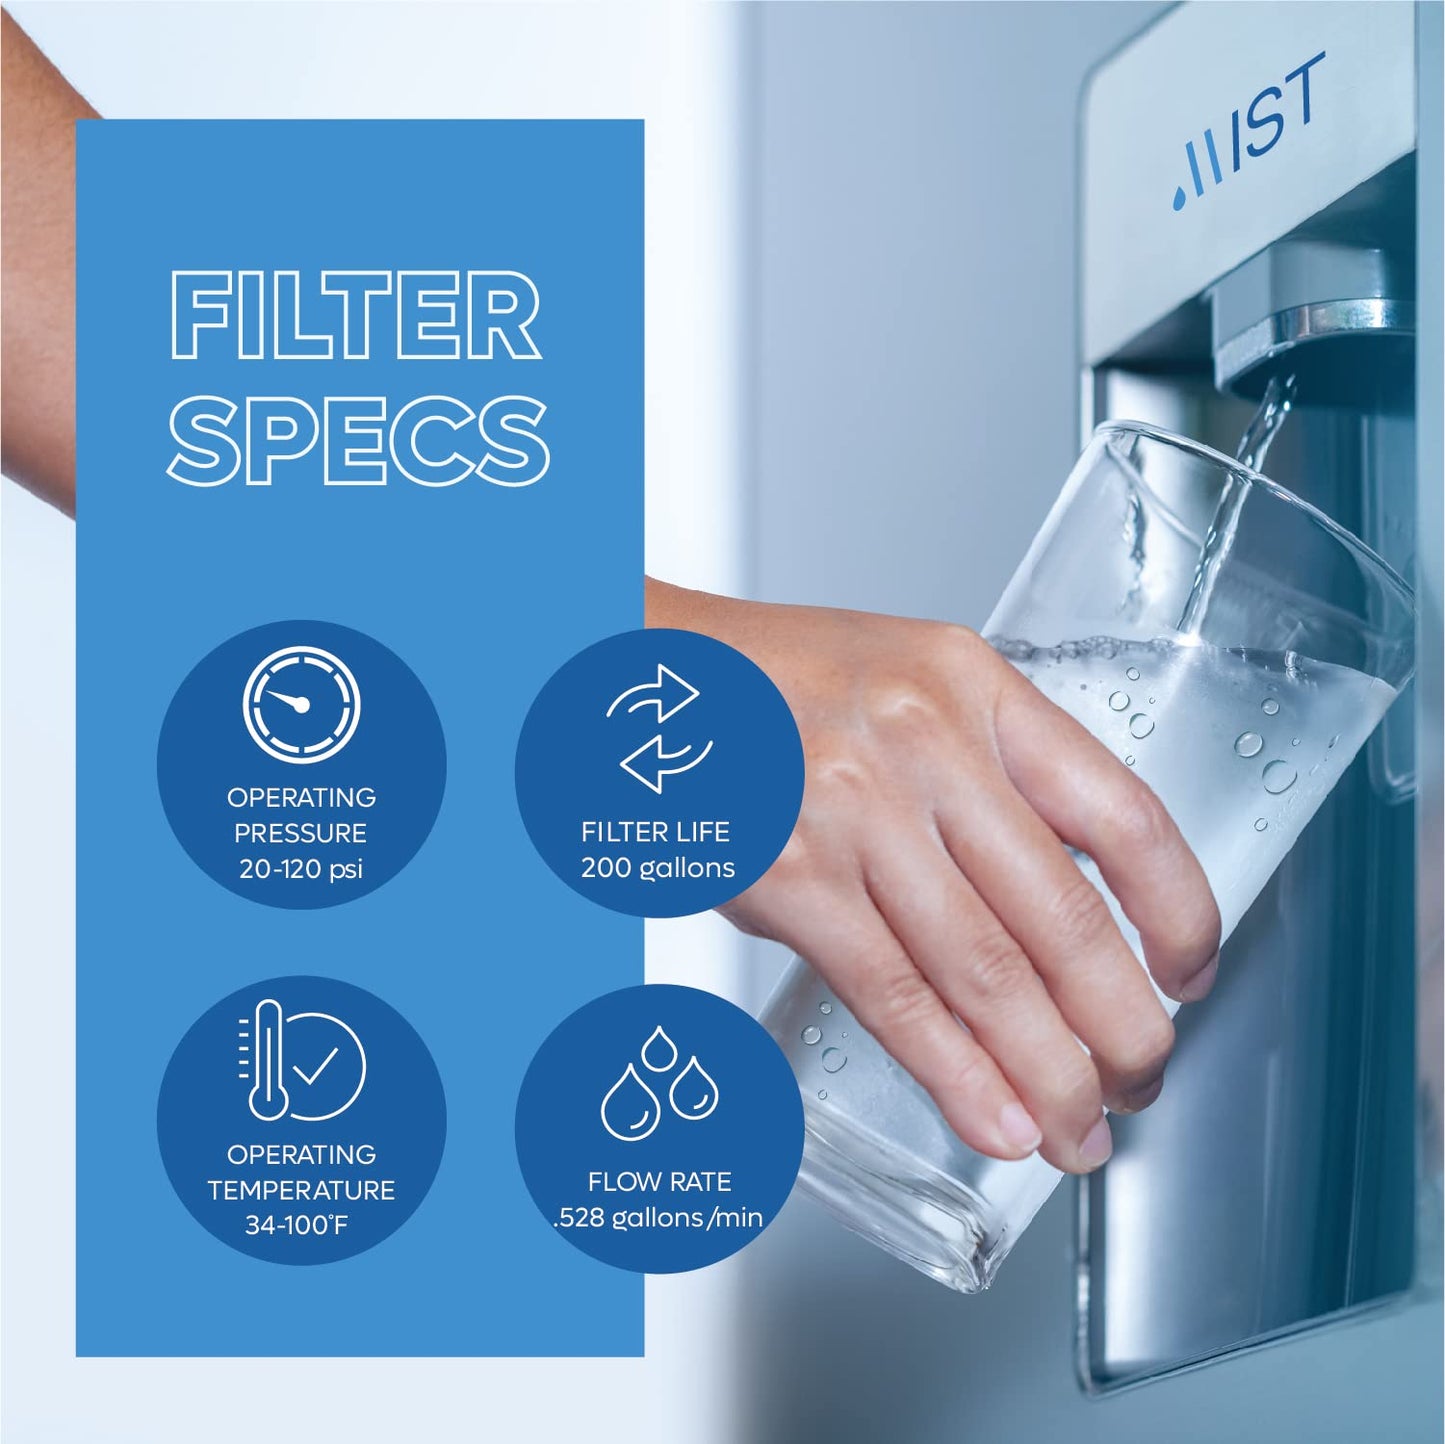 MIST MWF Water Filter Replacement for GE, Refrigerator Water Filter compatible with MWFP, MWFA, GWF, HWF, Smart Water, WFC1201, Kenmore 9991, 469991, WFC1201, GSE25GSHECSS, GE Water Filter (1 pack)